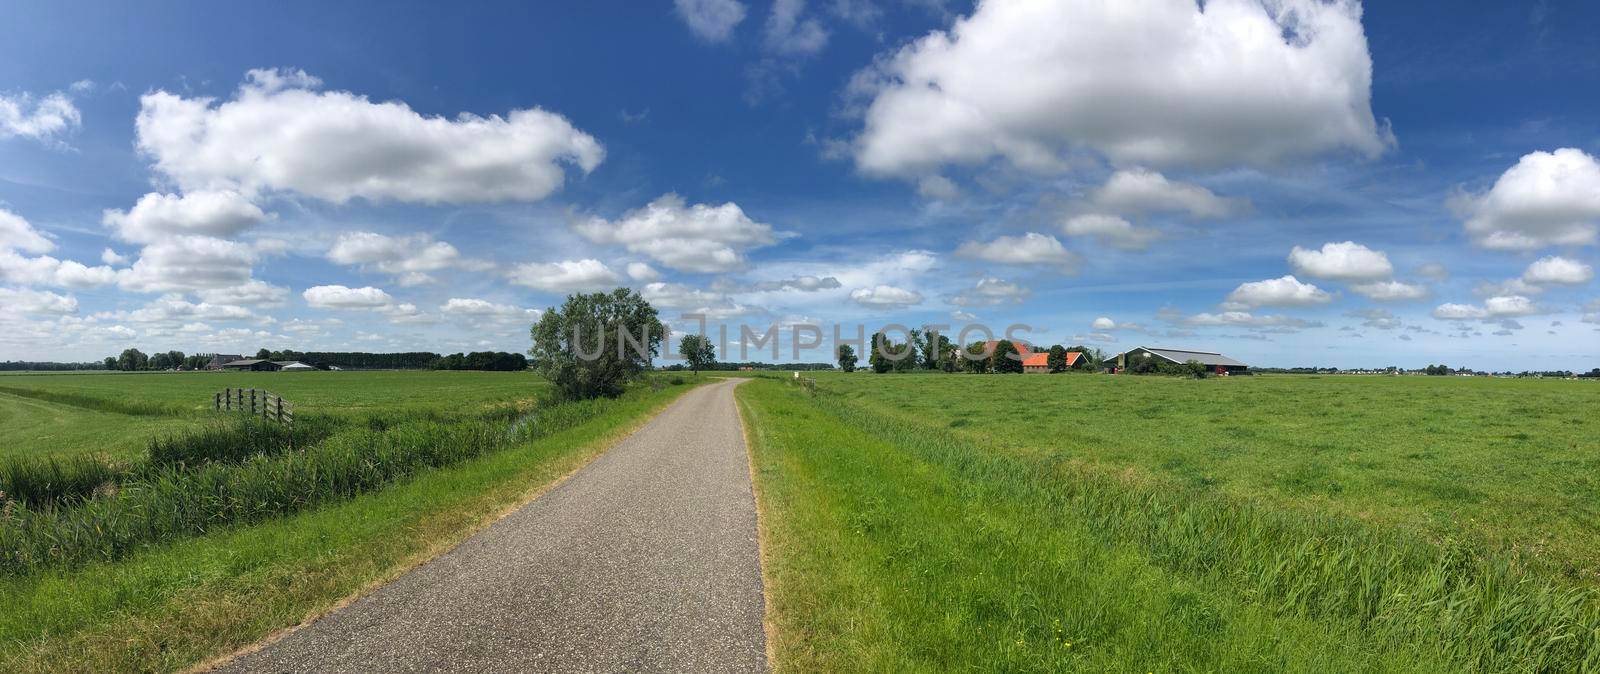 Panorama from a road towards Cornjum in Friesland The Netherlands